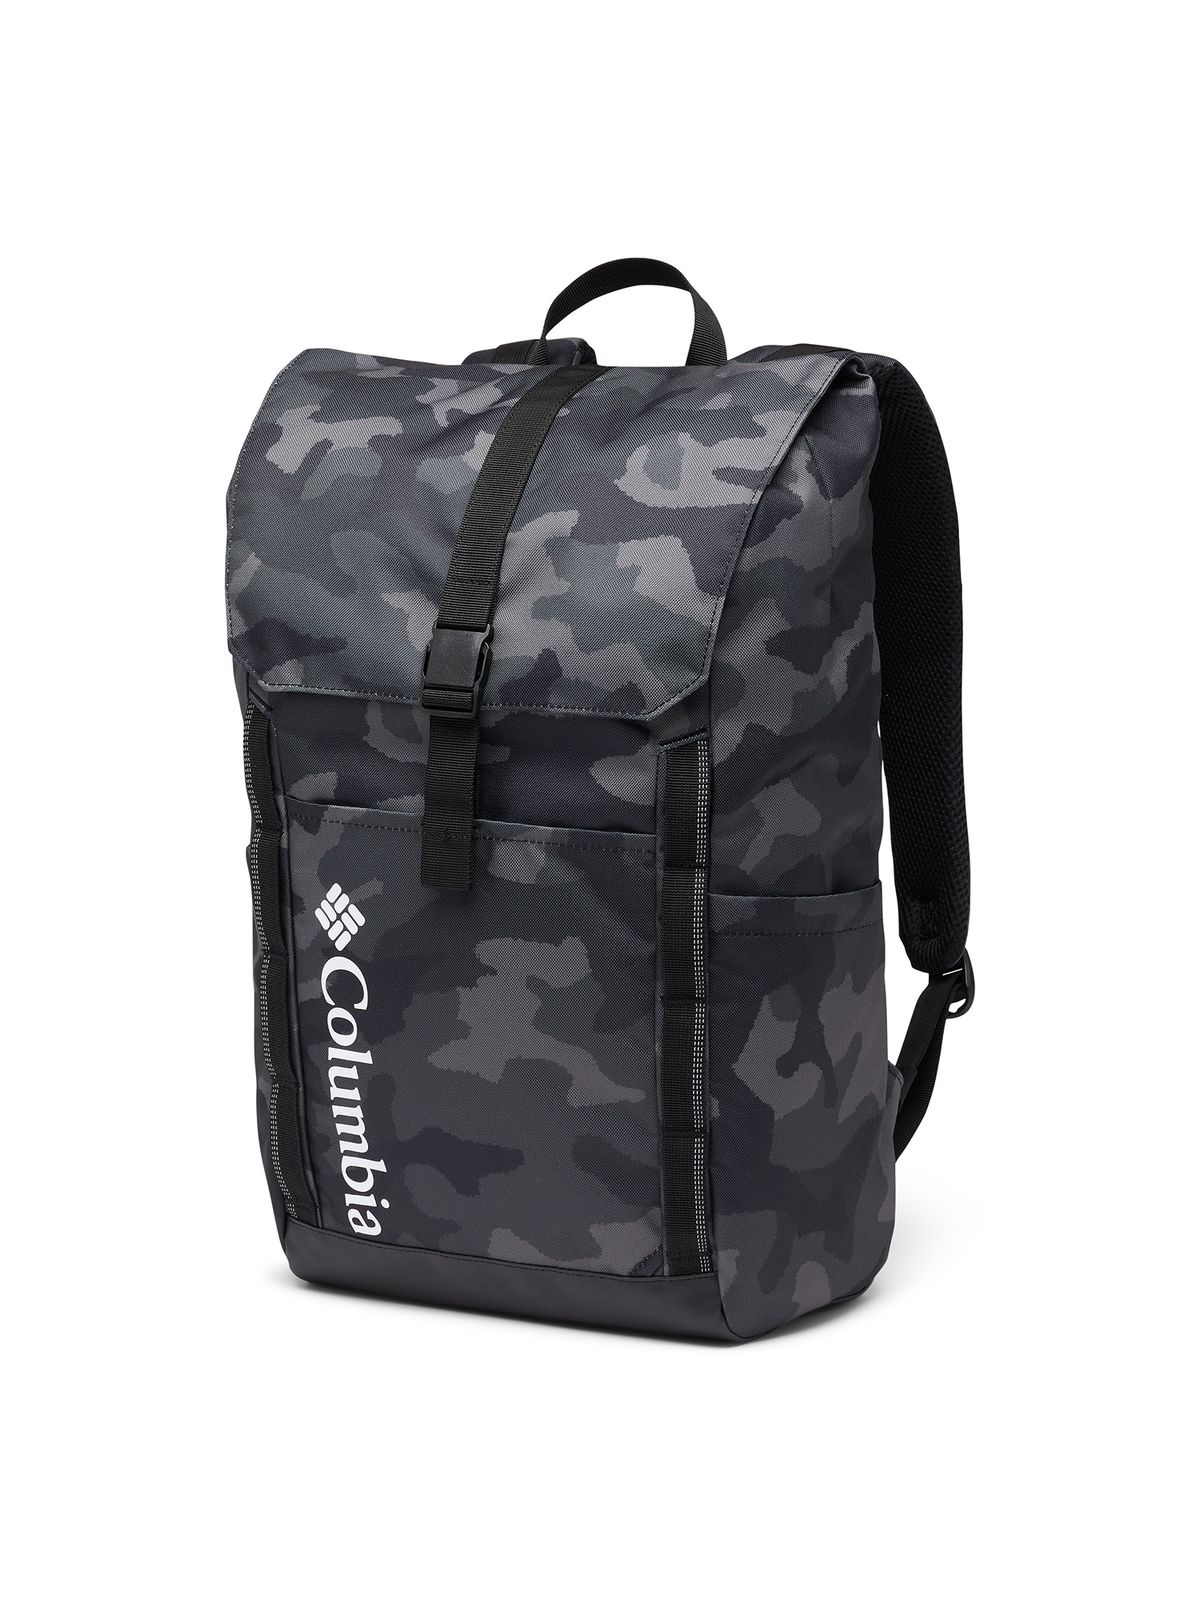 Convey 24L Backpack